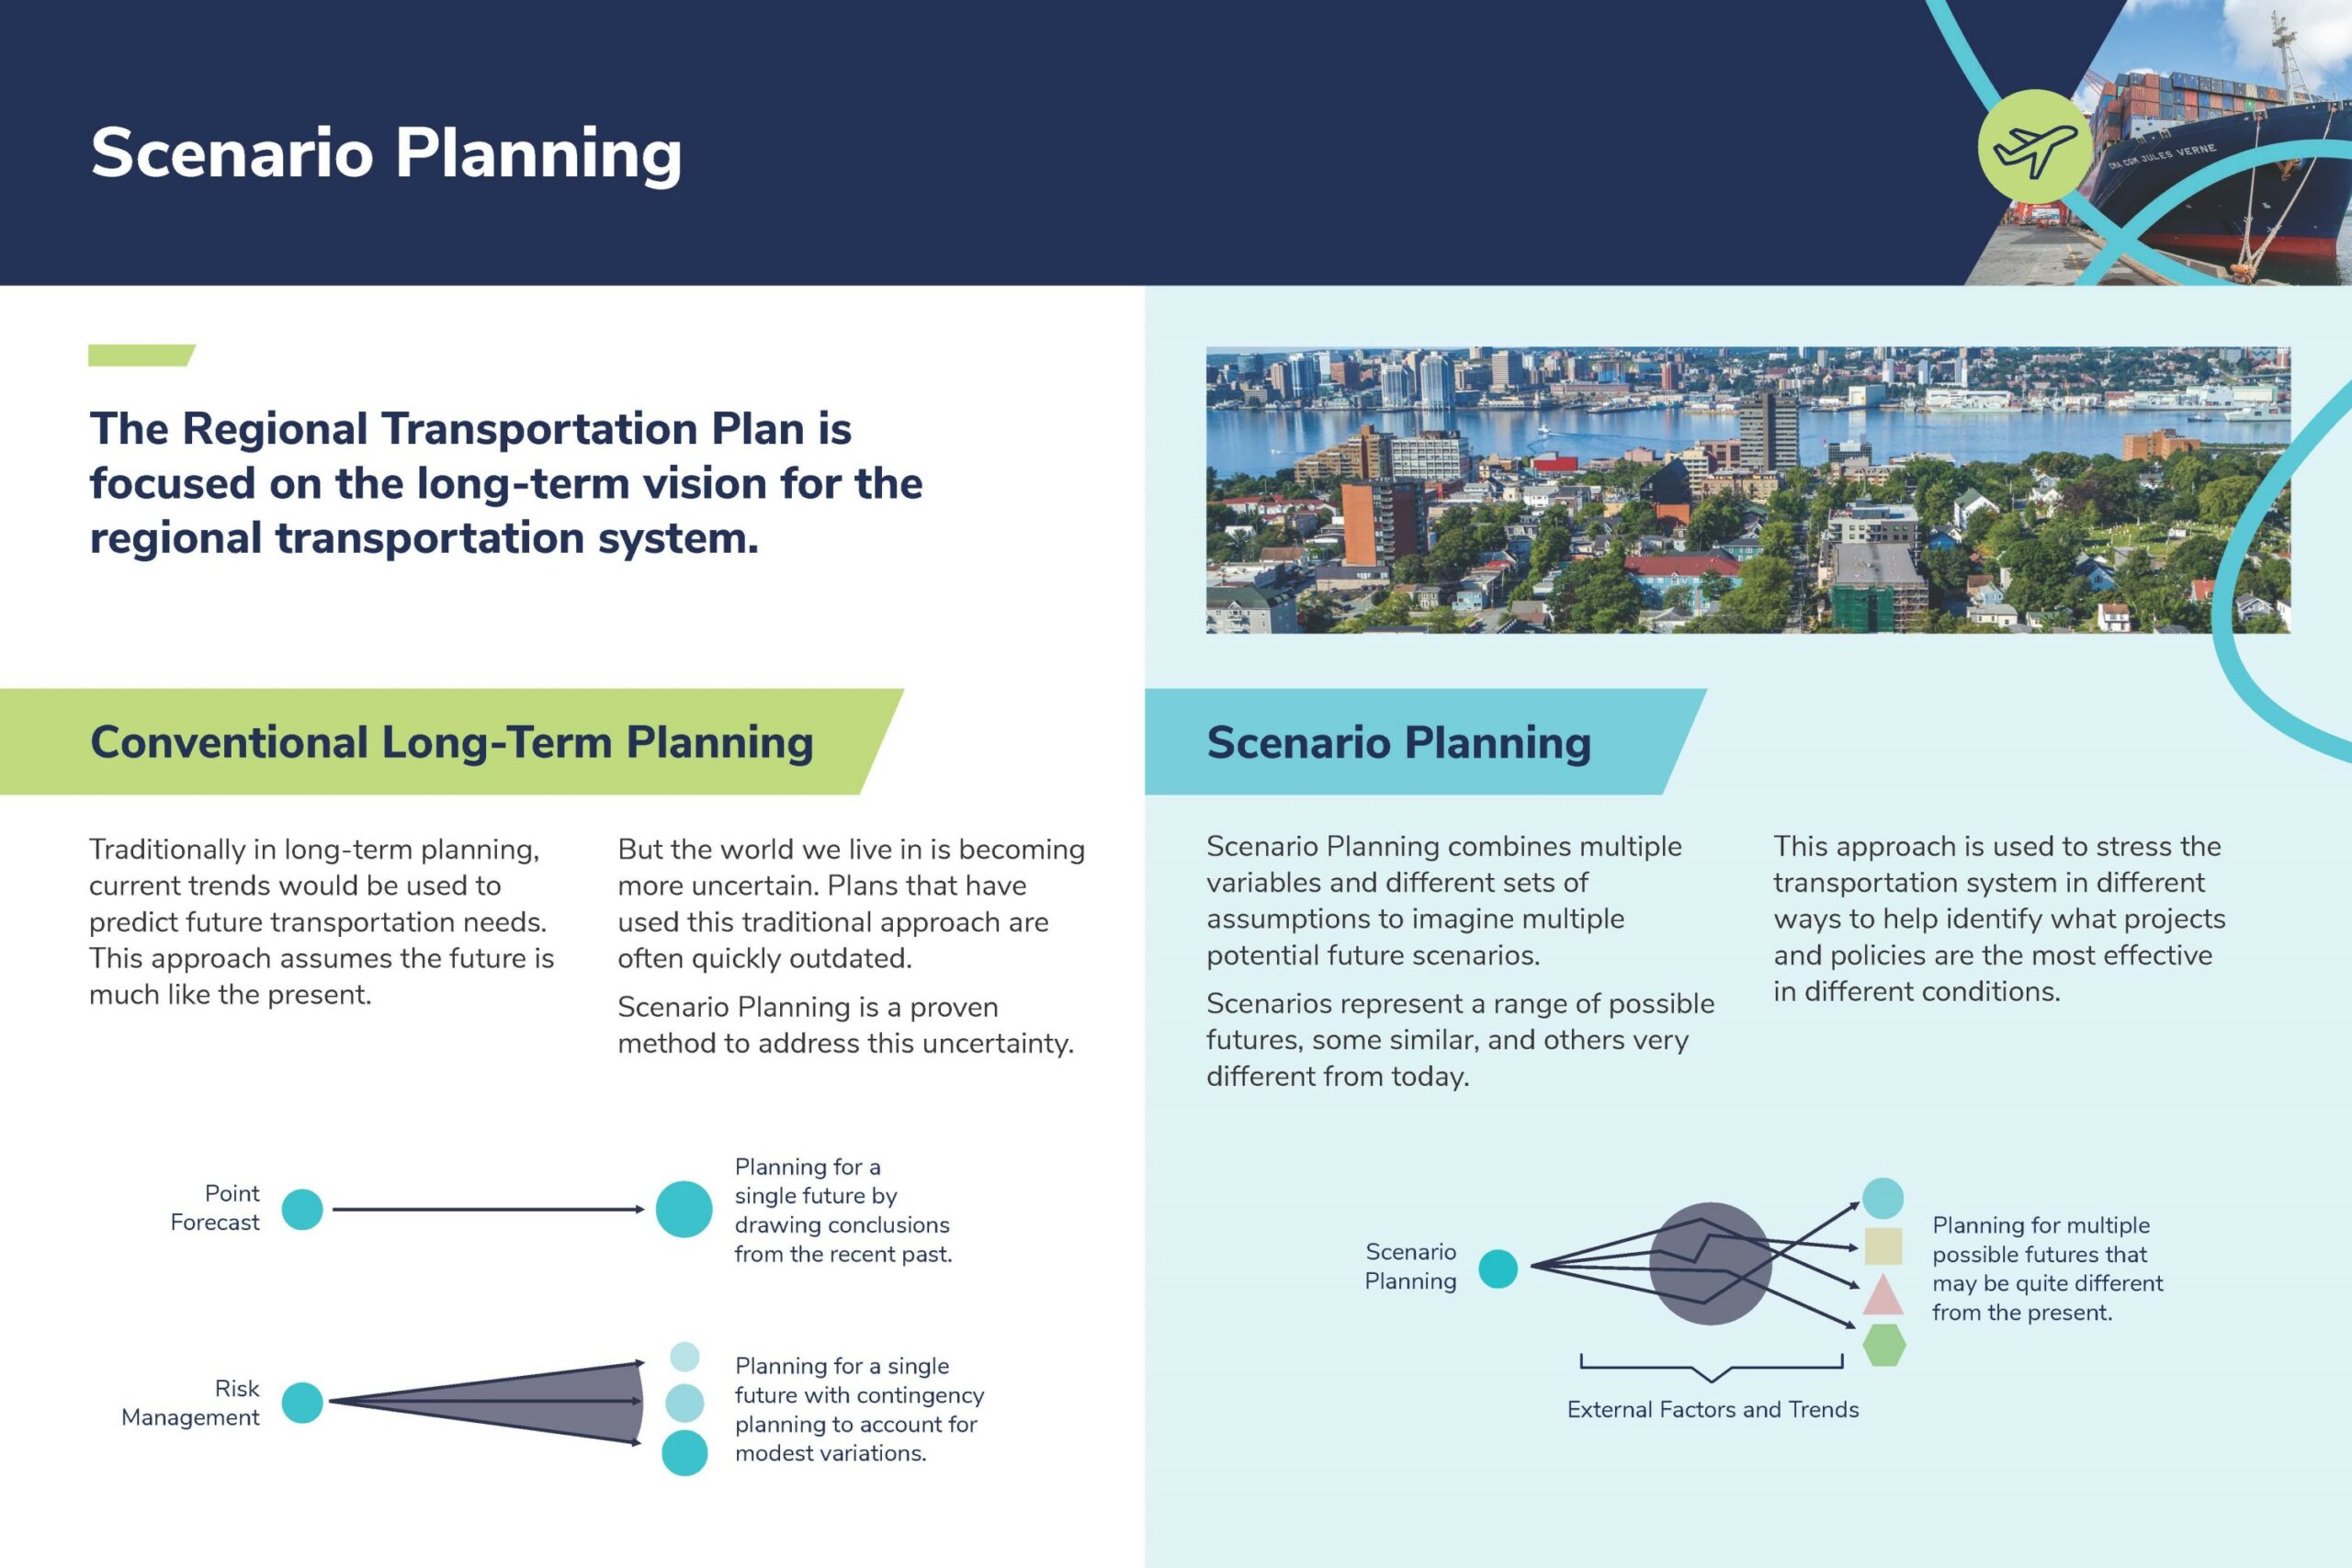 Scenario Planning The plan is focused on the long-term vision for the regional transportation system. Conventional Long-Term Planning Traditionally in long term planning, current trends would be used to predict future transportation needs. This approach assumes the future is much like the present. But the world we live in is becoming more uncertain. Plans that have used this traditional approach are often quickly outdated. Scenario Planning is a proven method to address this uncertainty. Scenario Planning combines multiple variables and different sets of assumptions to imagine multiple potential future scenarios. Scenarios represent a range of possible futures, some similar, and others very different from today. This approach is used to stress the transportation system in different ways to help identify what projects and policies are the most effective in different conditions.